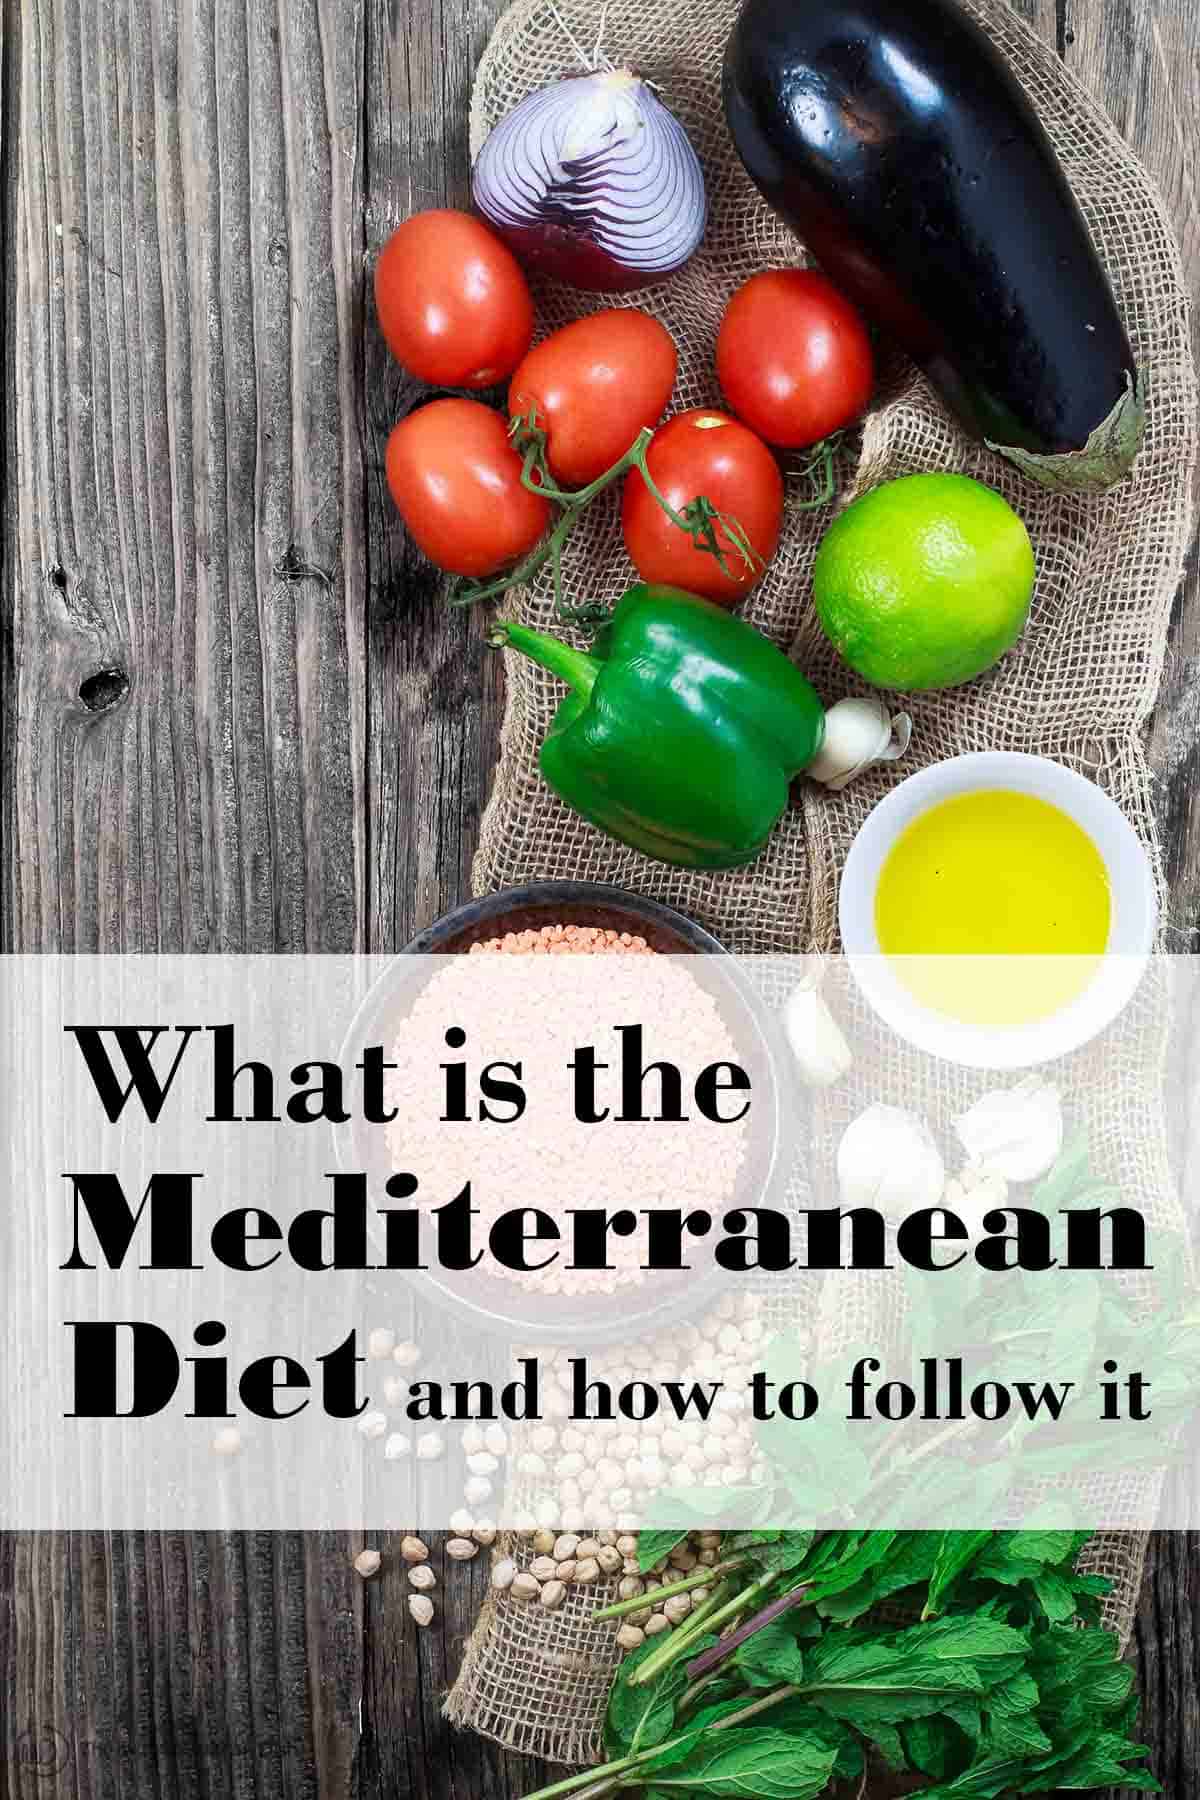 Image with Mediterranean diet ingredients. What is the Mediterranean diet and how to follow it